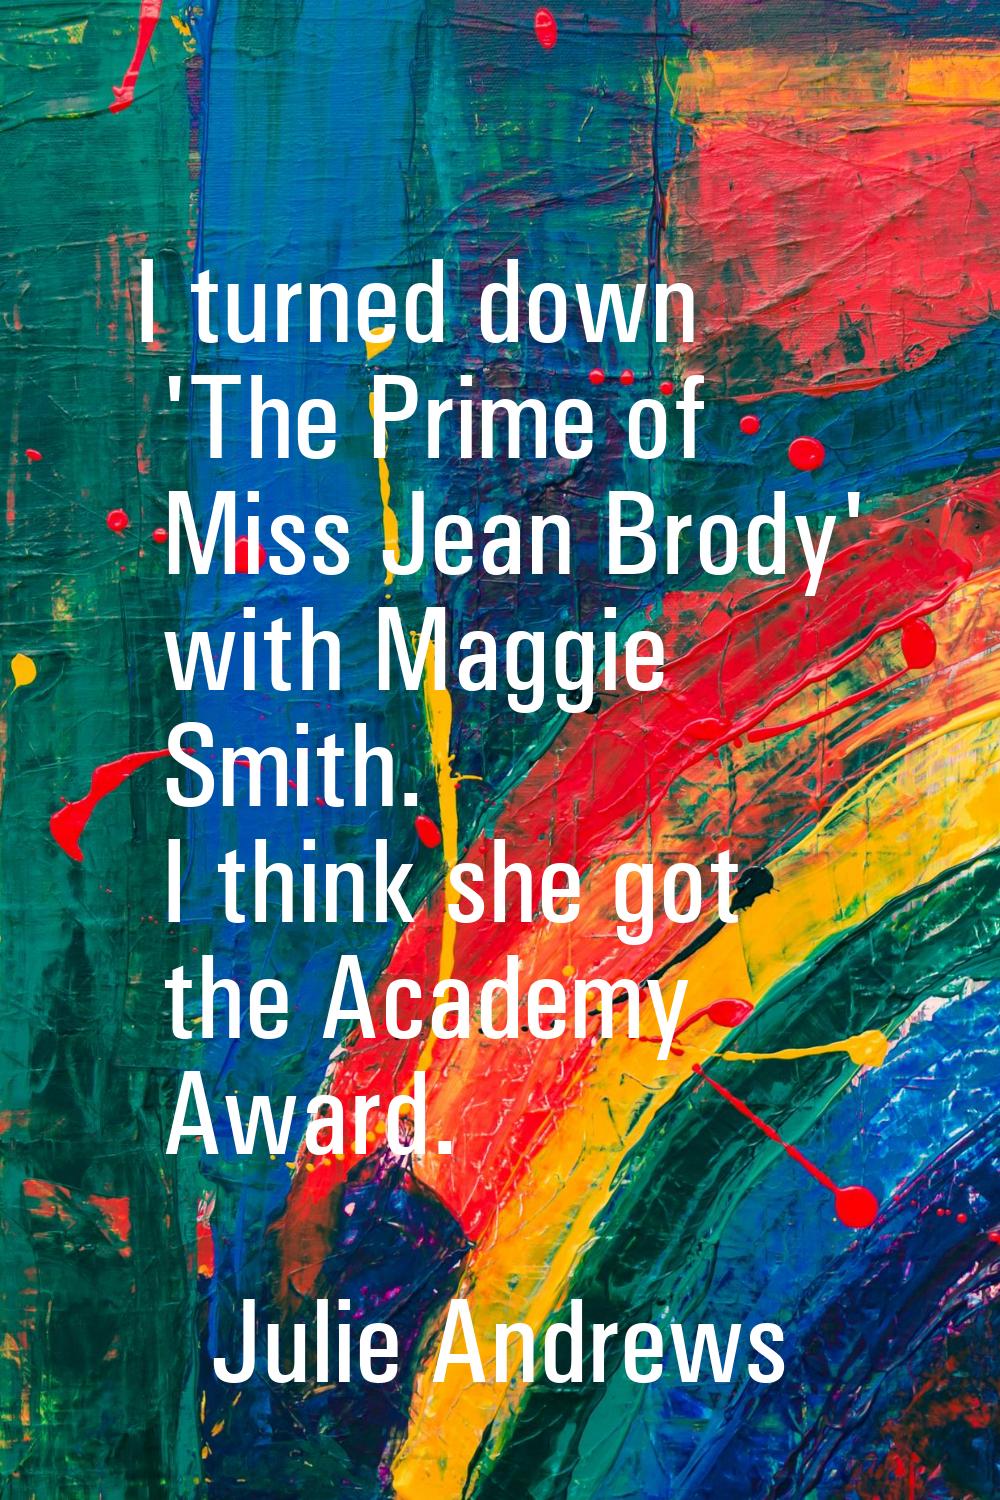 I turned down 'The Prime of Miss Jean Brody' with Maggie Smith. I think she got the Academy Award.